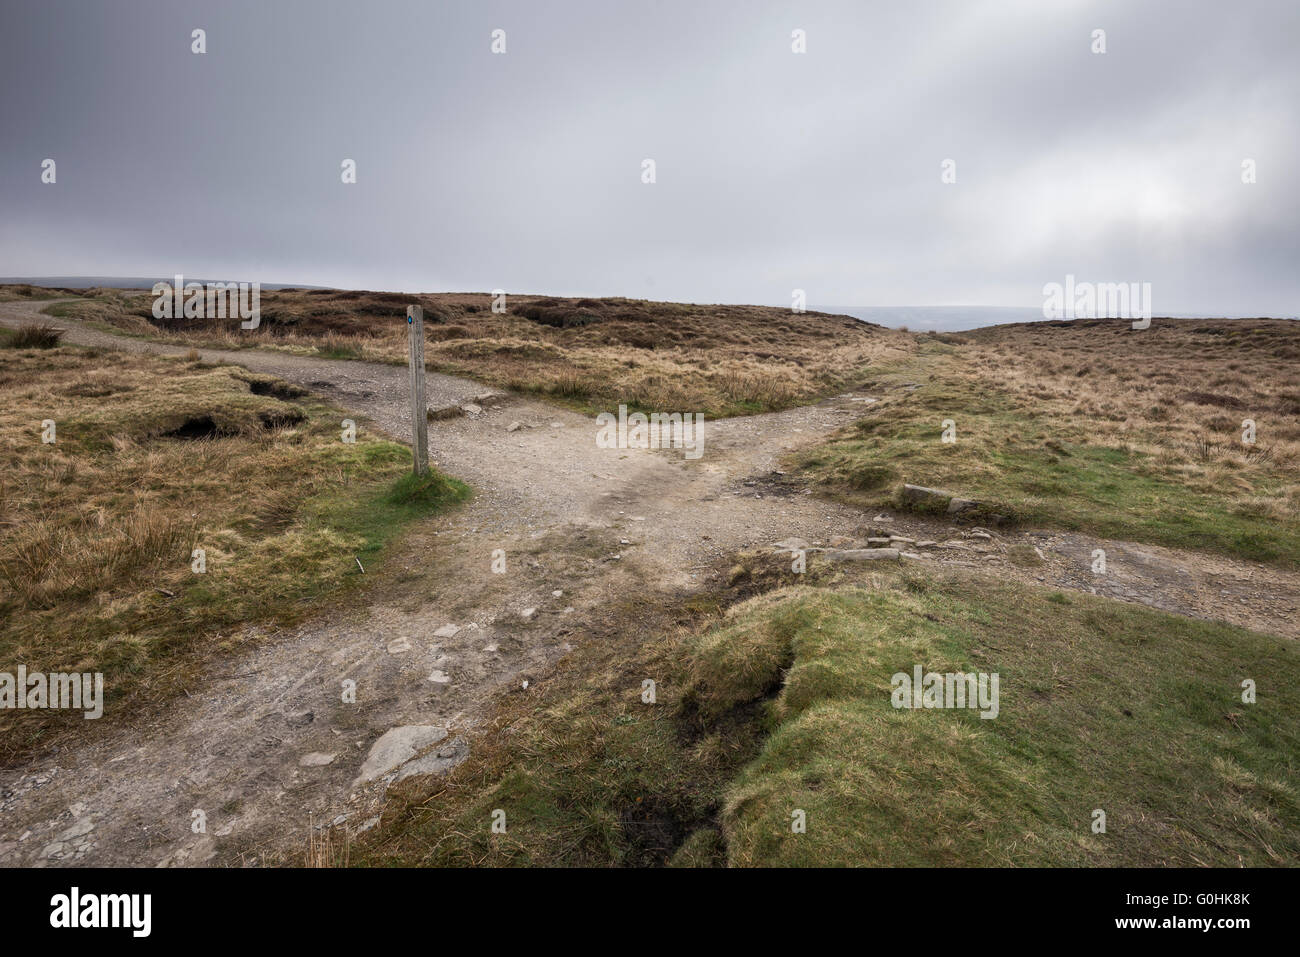 Junction of Doctor's gate and the Pennine way footpaths on the moors of Bleaklow, Derbyshire. Stock Photo